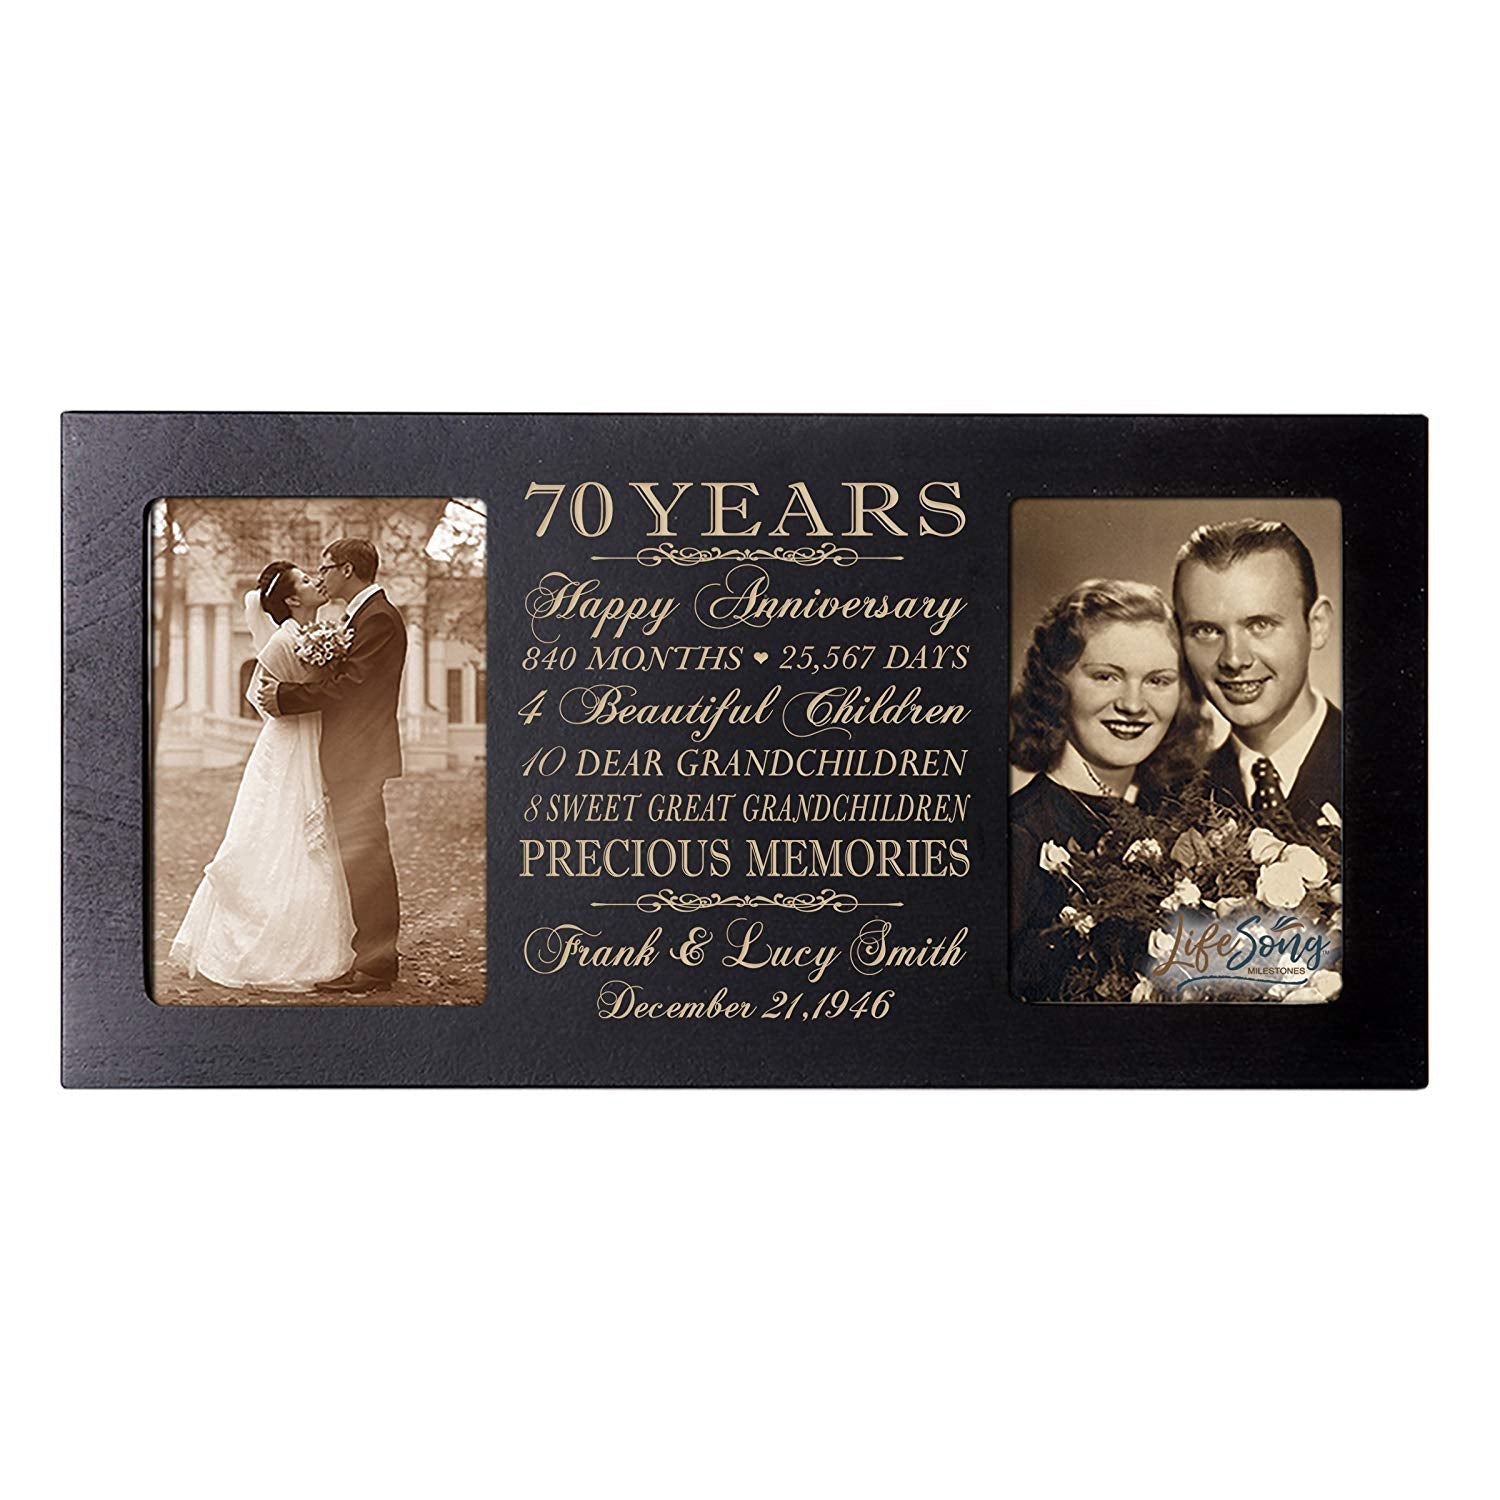 Lifesong Milestones Personalized Picture Frame for Couples 70th Wedding Anniversary Decorations